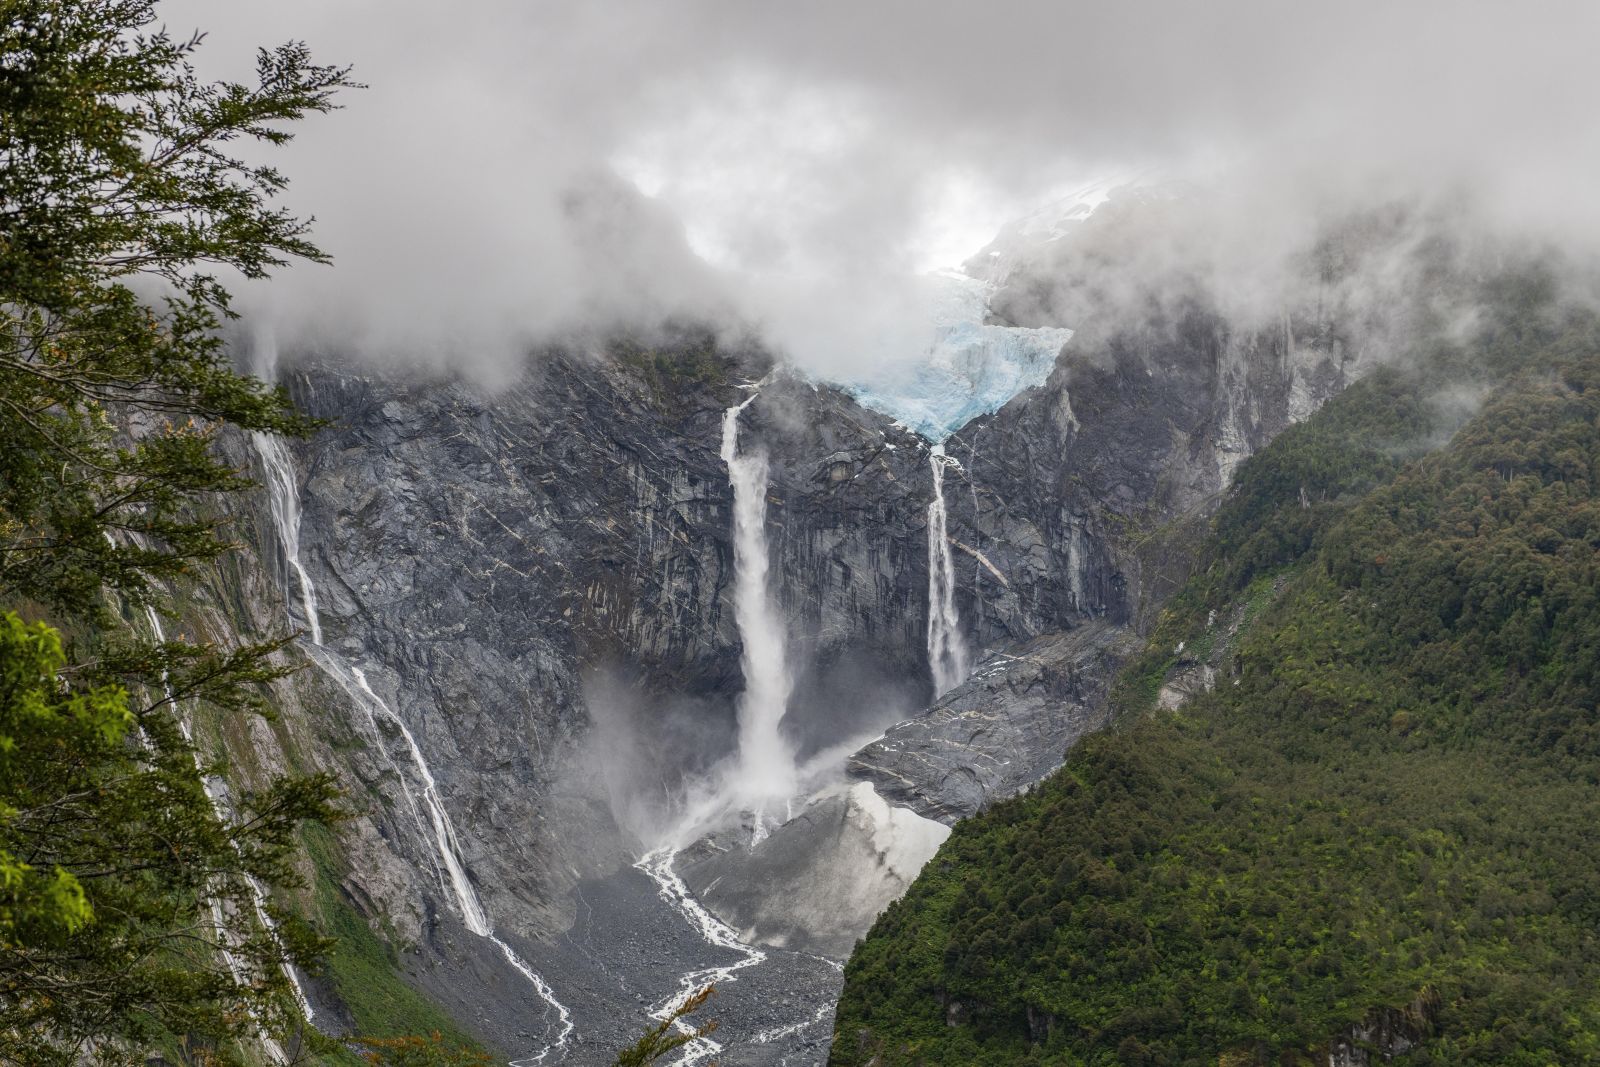 Waterfalls in Chile’s Queulat National Park: when glaciers are diminished, entire water-catchment basins feel the impacts downstream.